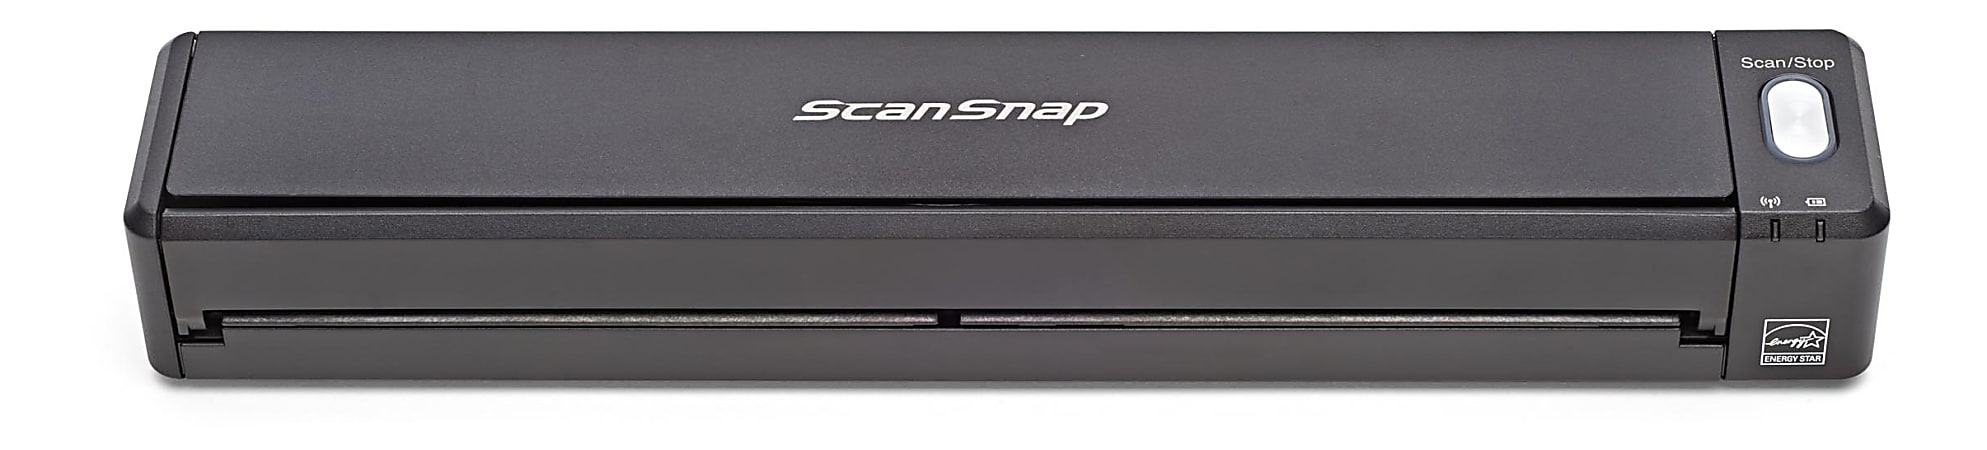 PC/タブレット その他 Fujitsu ScanSnap iX100 Wireless Color Sheetfed Scanner